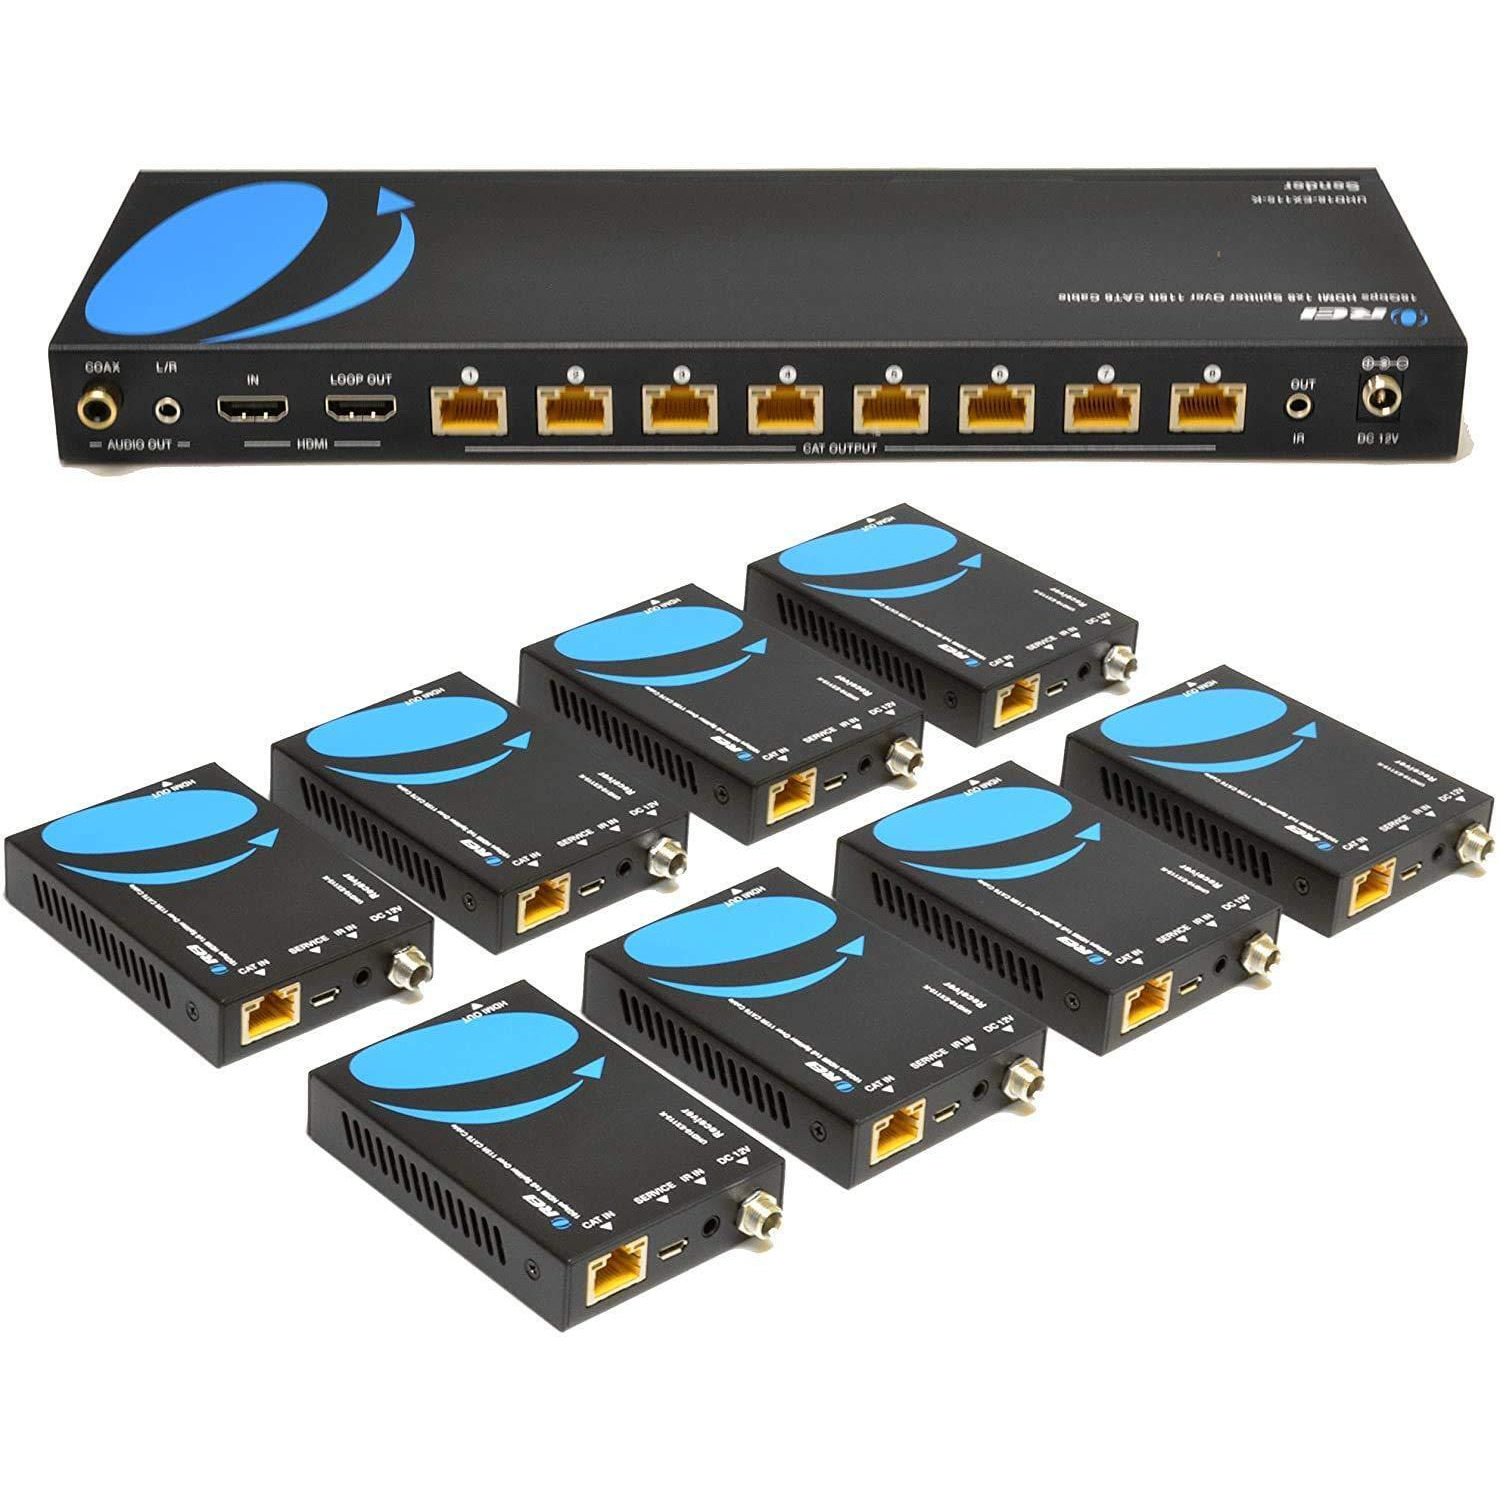 1x8 HDMI Extender Splitter 4K by OREI Multiple Over Single Cable CAT6/7 4K@60Hz 4:4:4 HDCP 2.2 With IR Remote EDID Management - Up to 115 Ft - Loop Out - Low Latency - Full Support